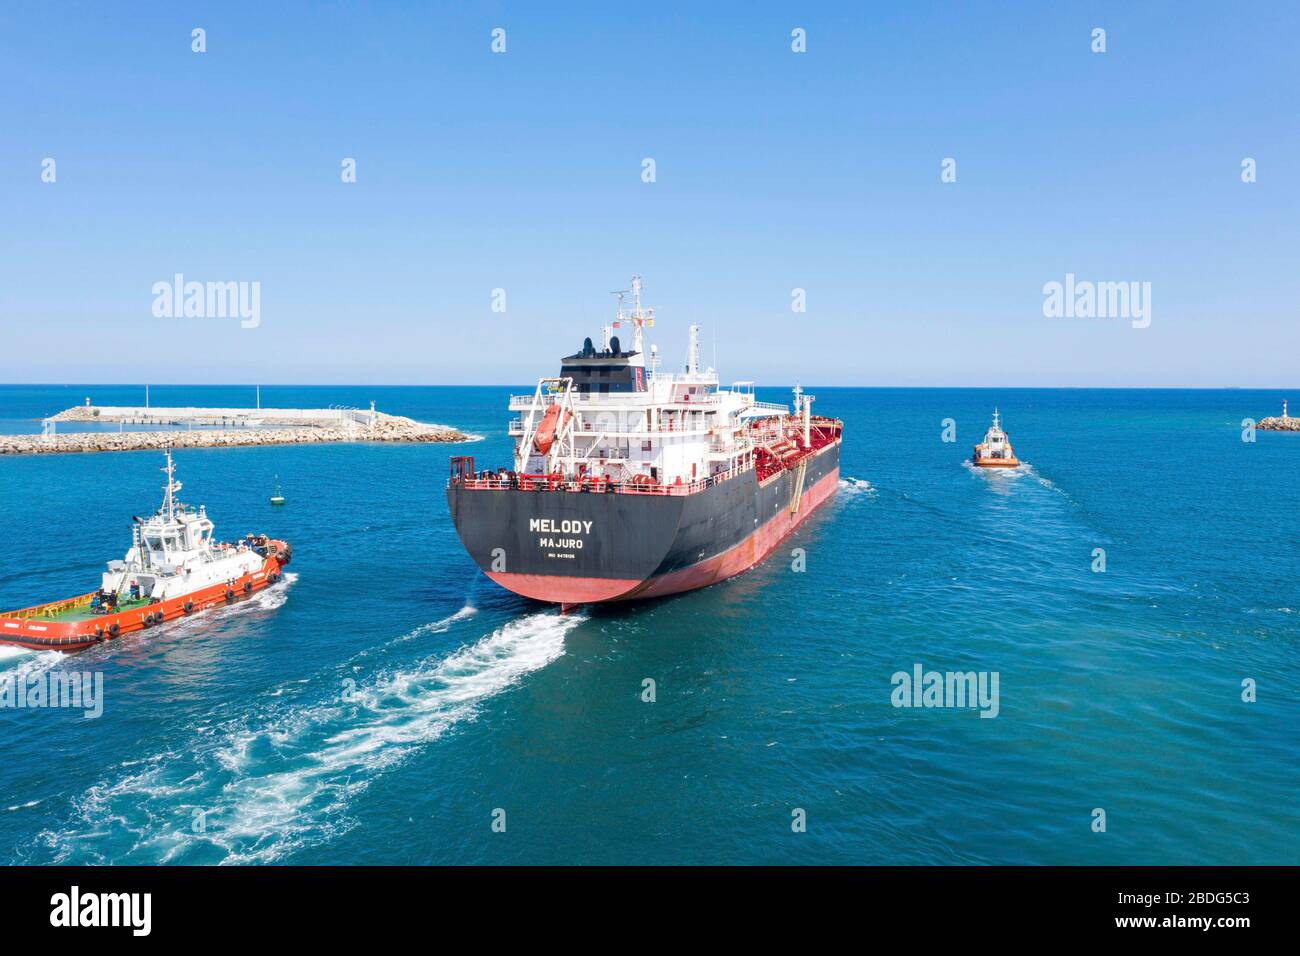 (200408) -- COLOMBO, April 8, 2020 (Xinhua) -- Aerial photo taken on April 7, 2020 shows the Marshall Islands-based Mt. Melody bunkering ship leaving Hambantota International Port, Sri Lanka. Sri Lanka-China joint venture, Hambantota International Port (HIP), is set to kick off fuel bunkering operations and support COVID-19 affected supply chains after a ship finished discharging low-sulphur fuel into the port's tanks on Tuesday afternoon. TO GO WITH:Sri Lanka's Hambantota port to support COVID-19 affected supply chains with low-sulphur fuel (Photo by Liu Hongru/Xinhua) Stock Photo